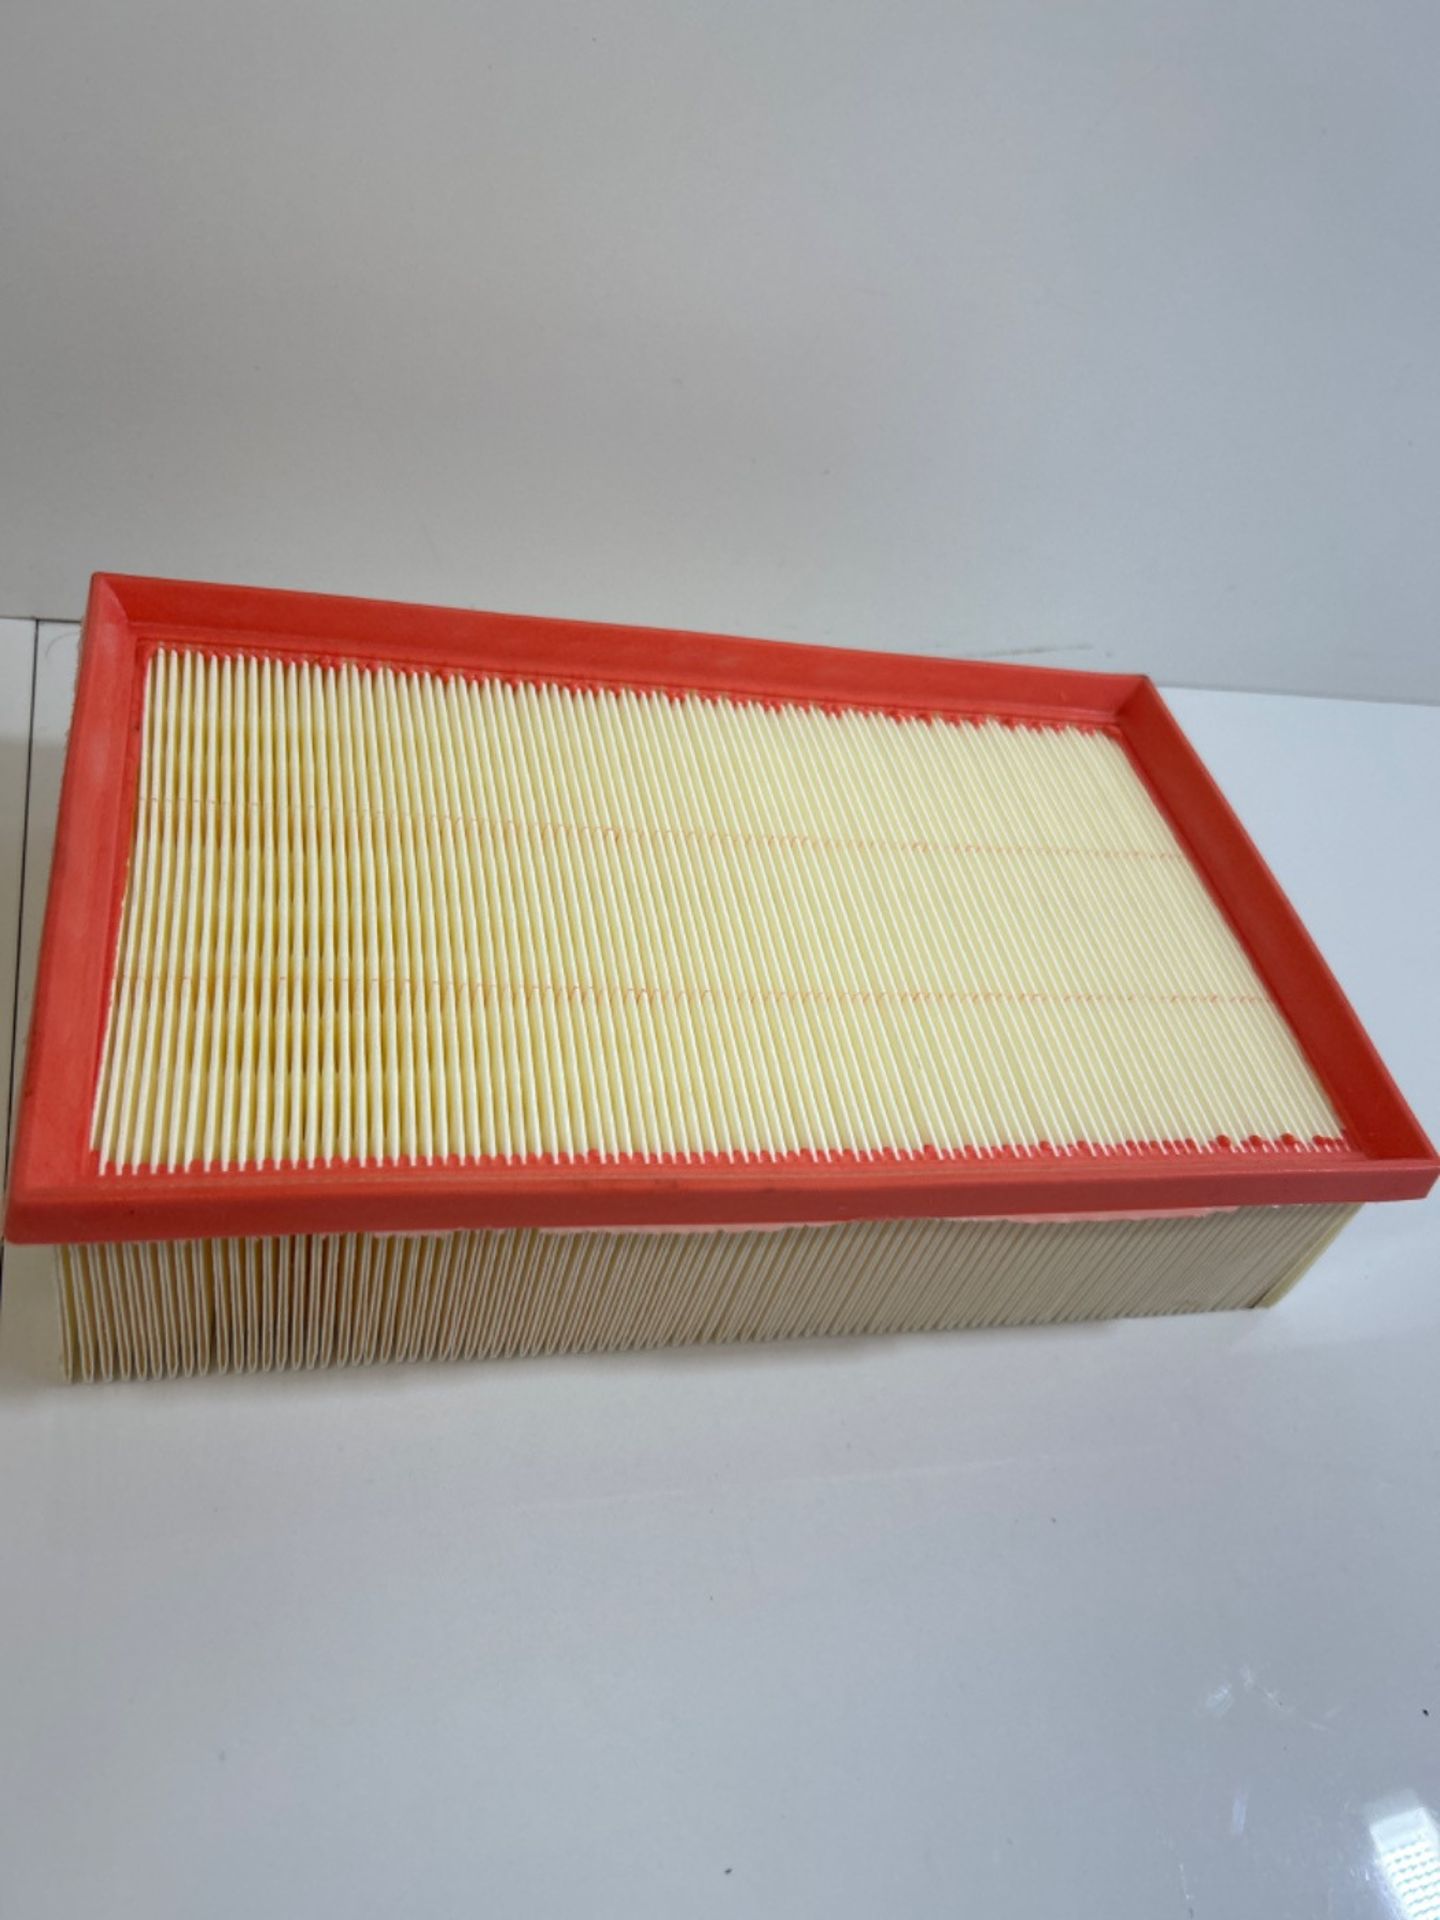 Bosch S0287 - Air Filter Car - Image 2 of 3